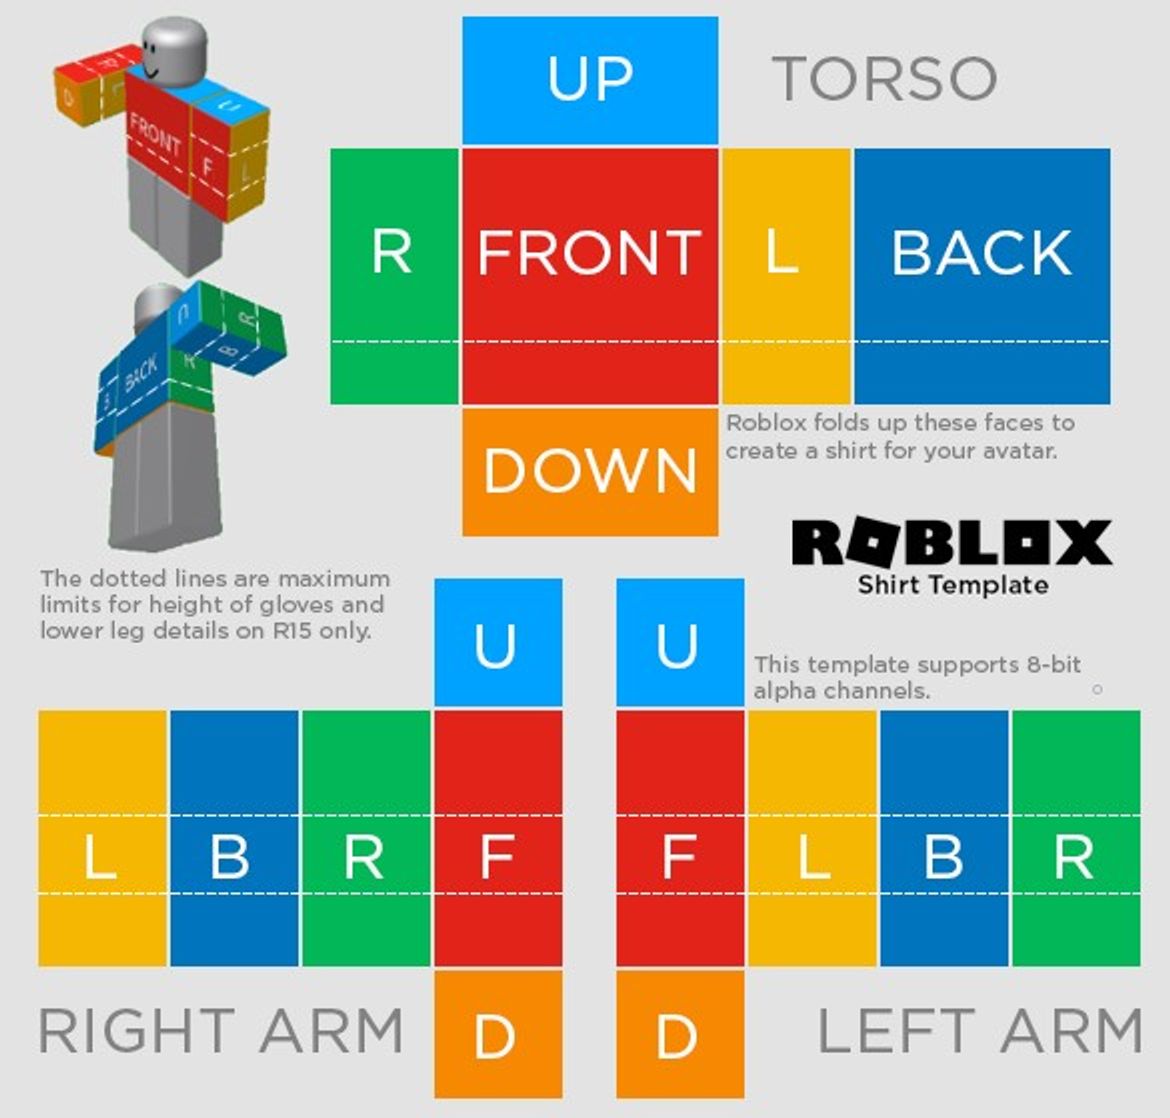 Roblox Shirt Template How to Use and Create Clothing